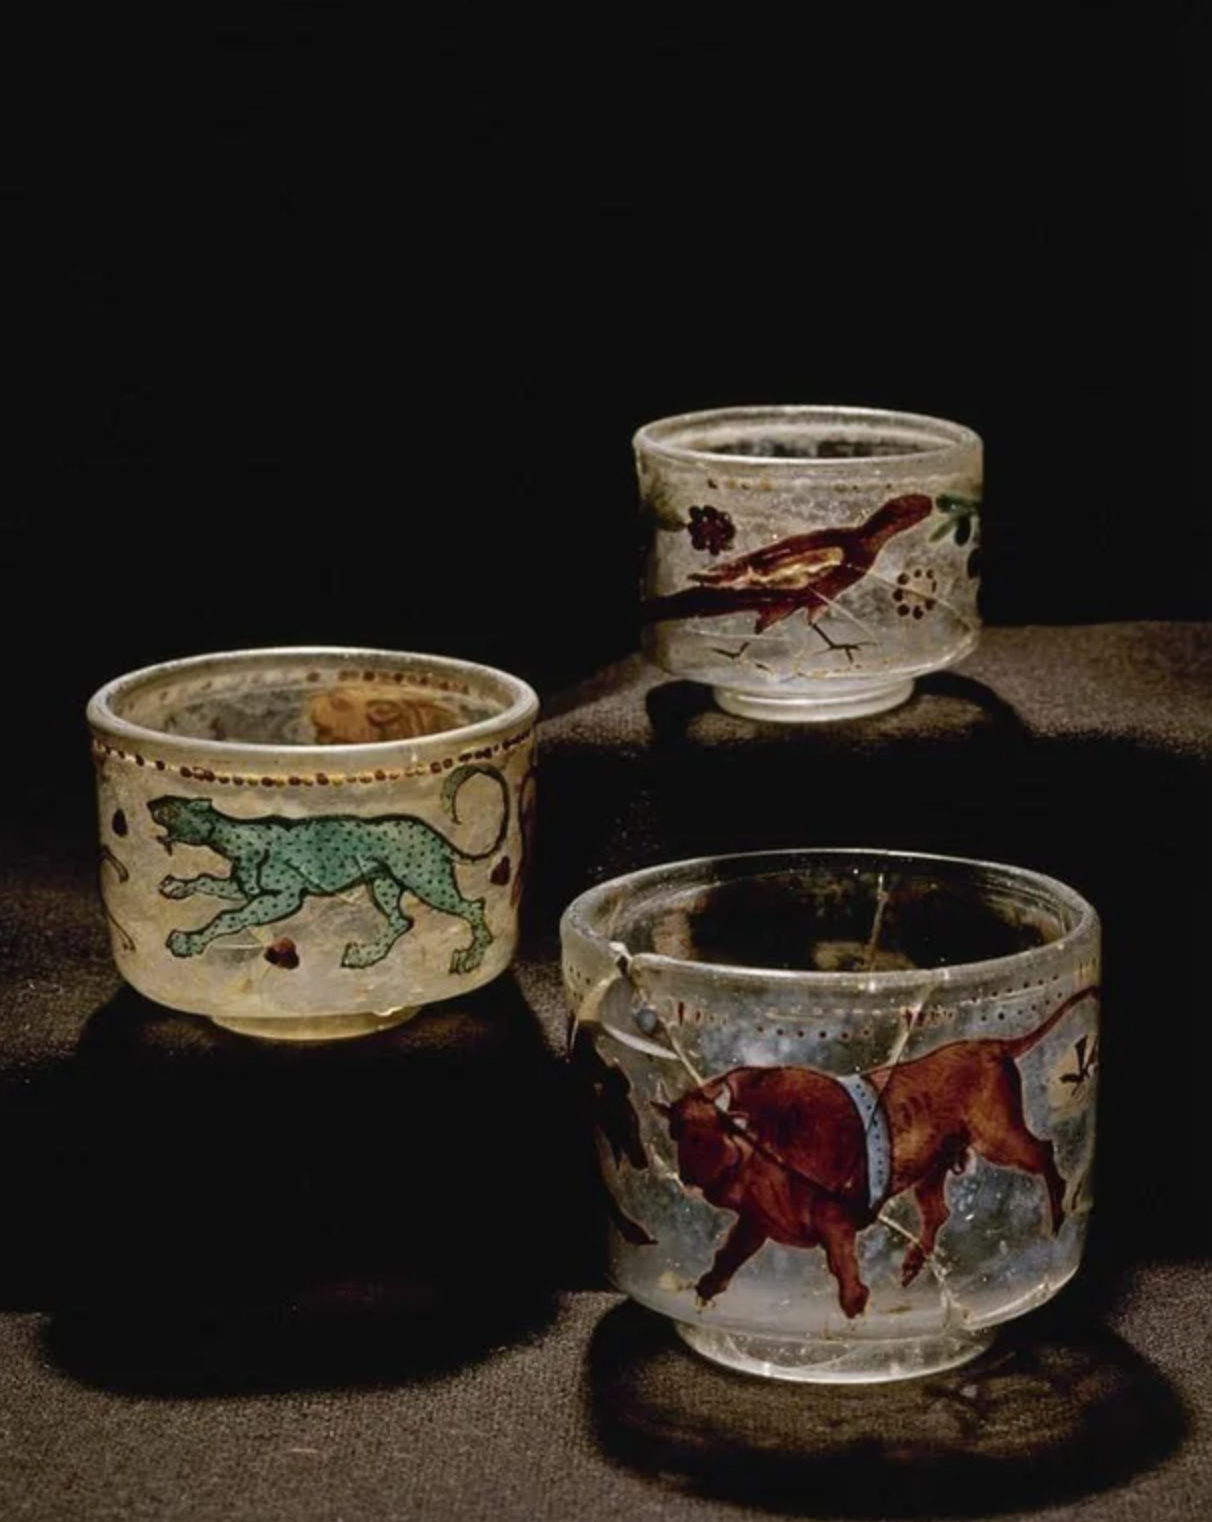 fascinating artifacts - Roman drinking cups